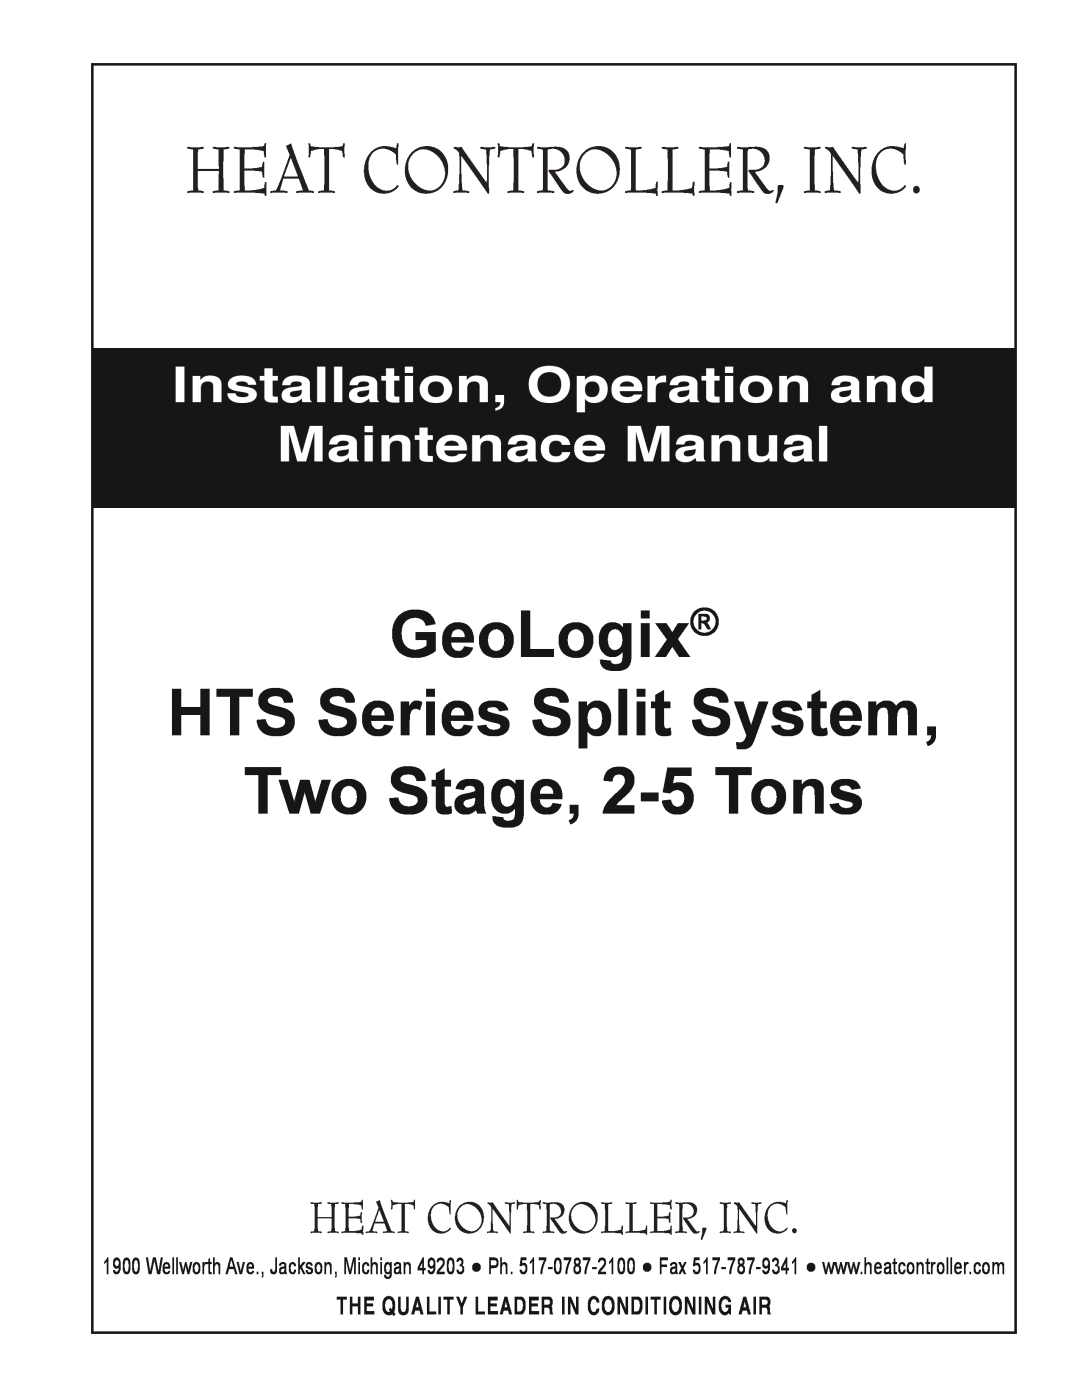 Heat Controller HTS SERIES manual GeoLogix HTS Series Split System, Two Stage, 2-5Tons 